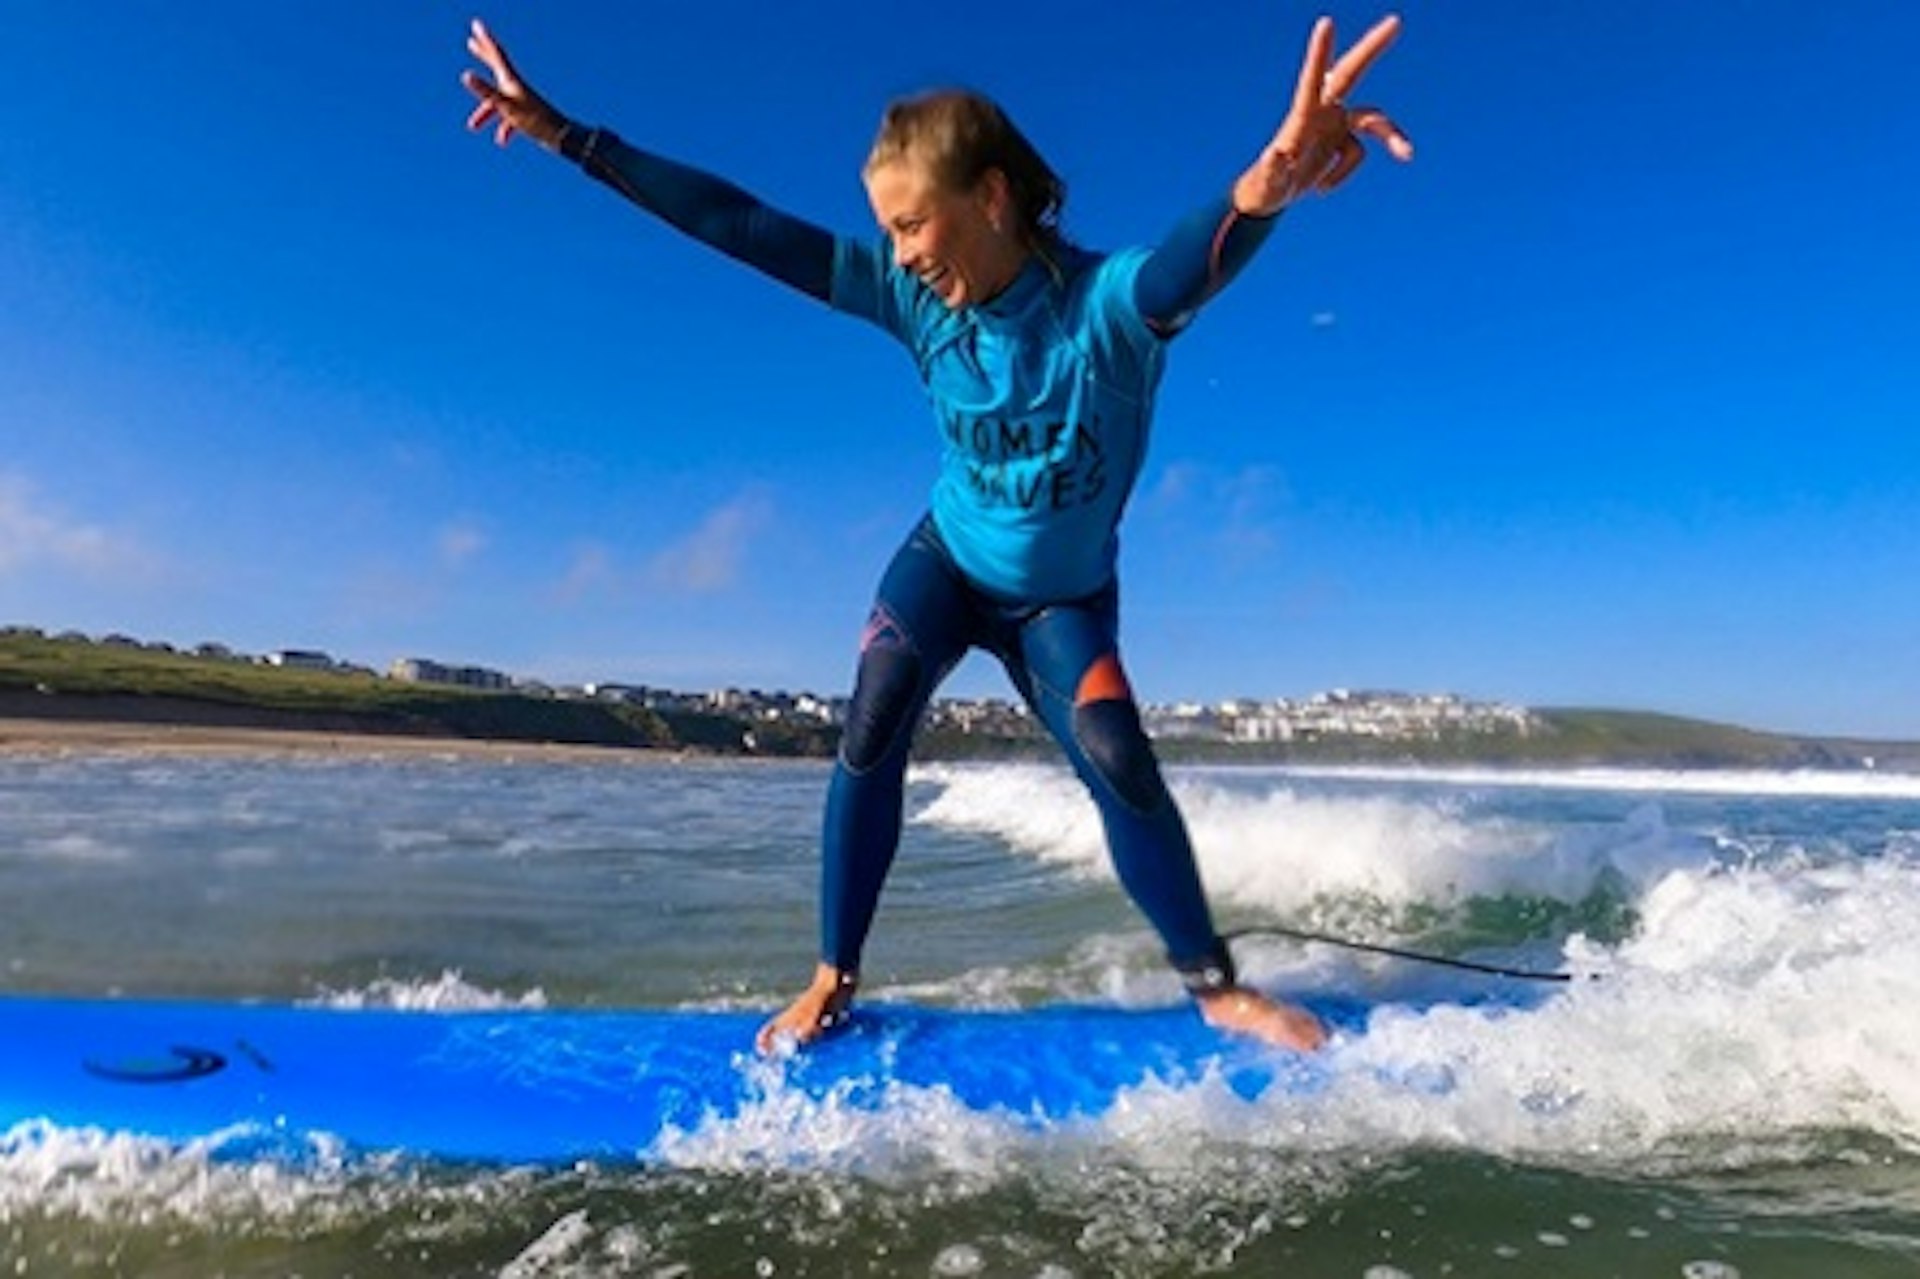 Weekend of Water Activities on the Cornish Coast with Women + Waves 3